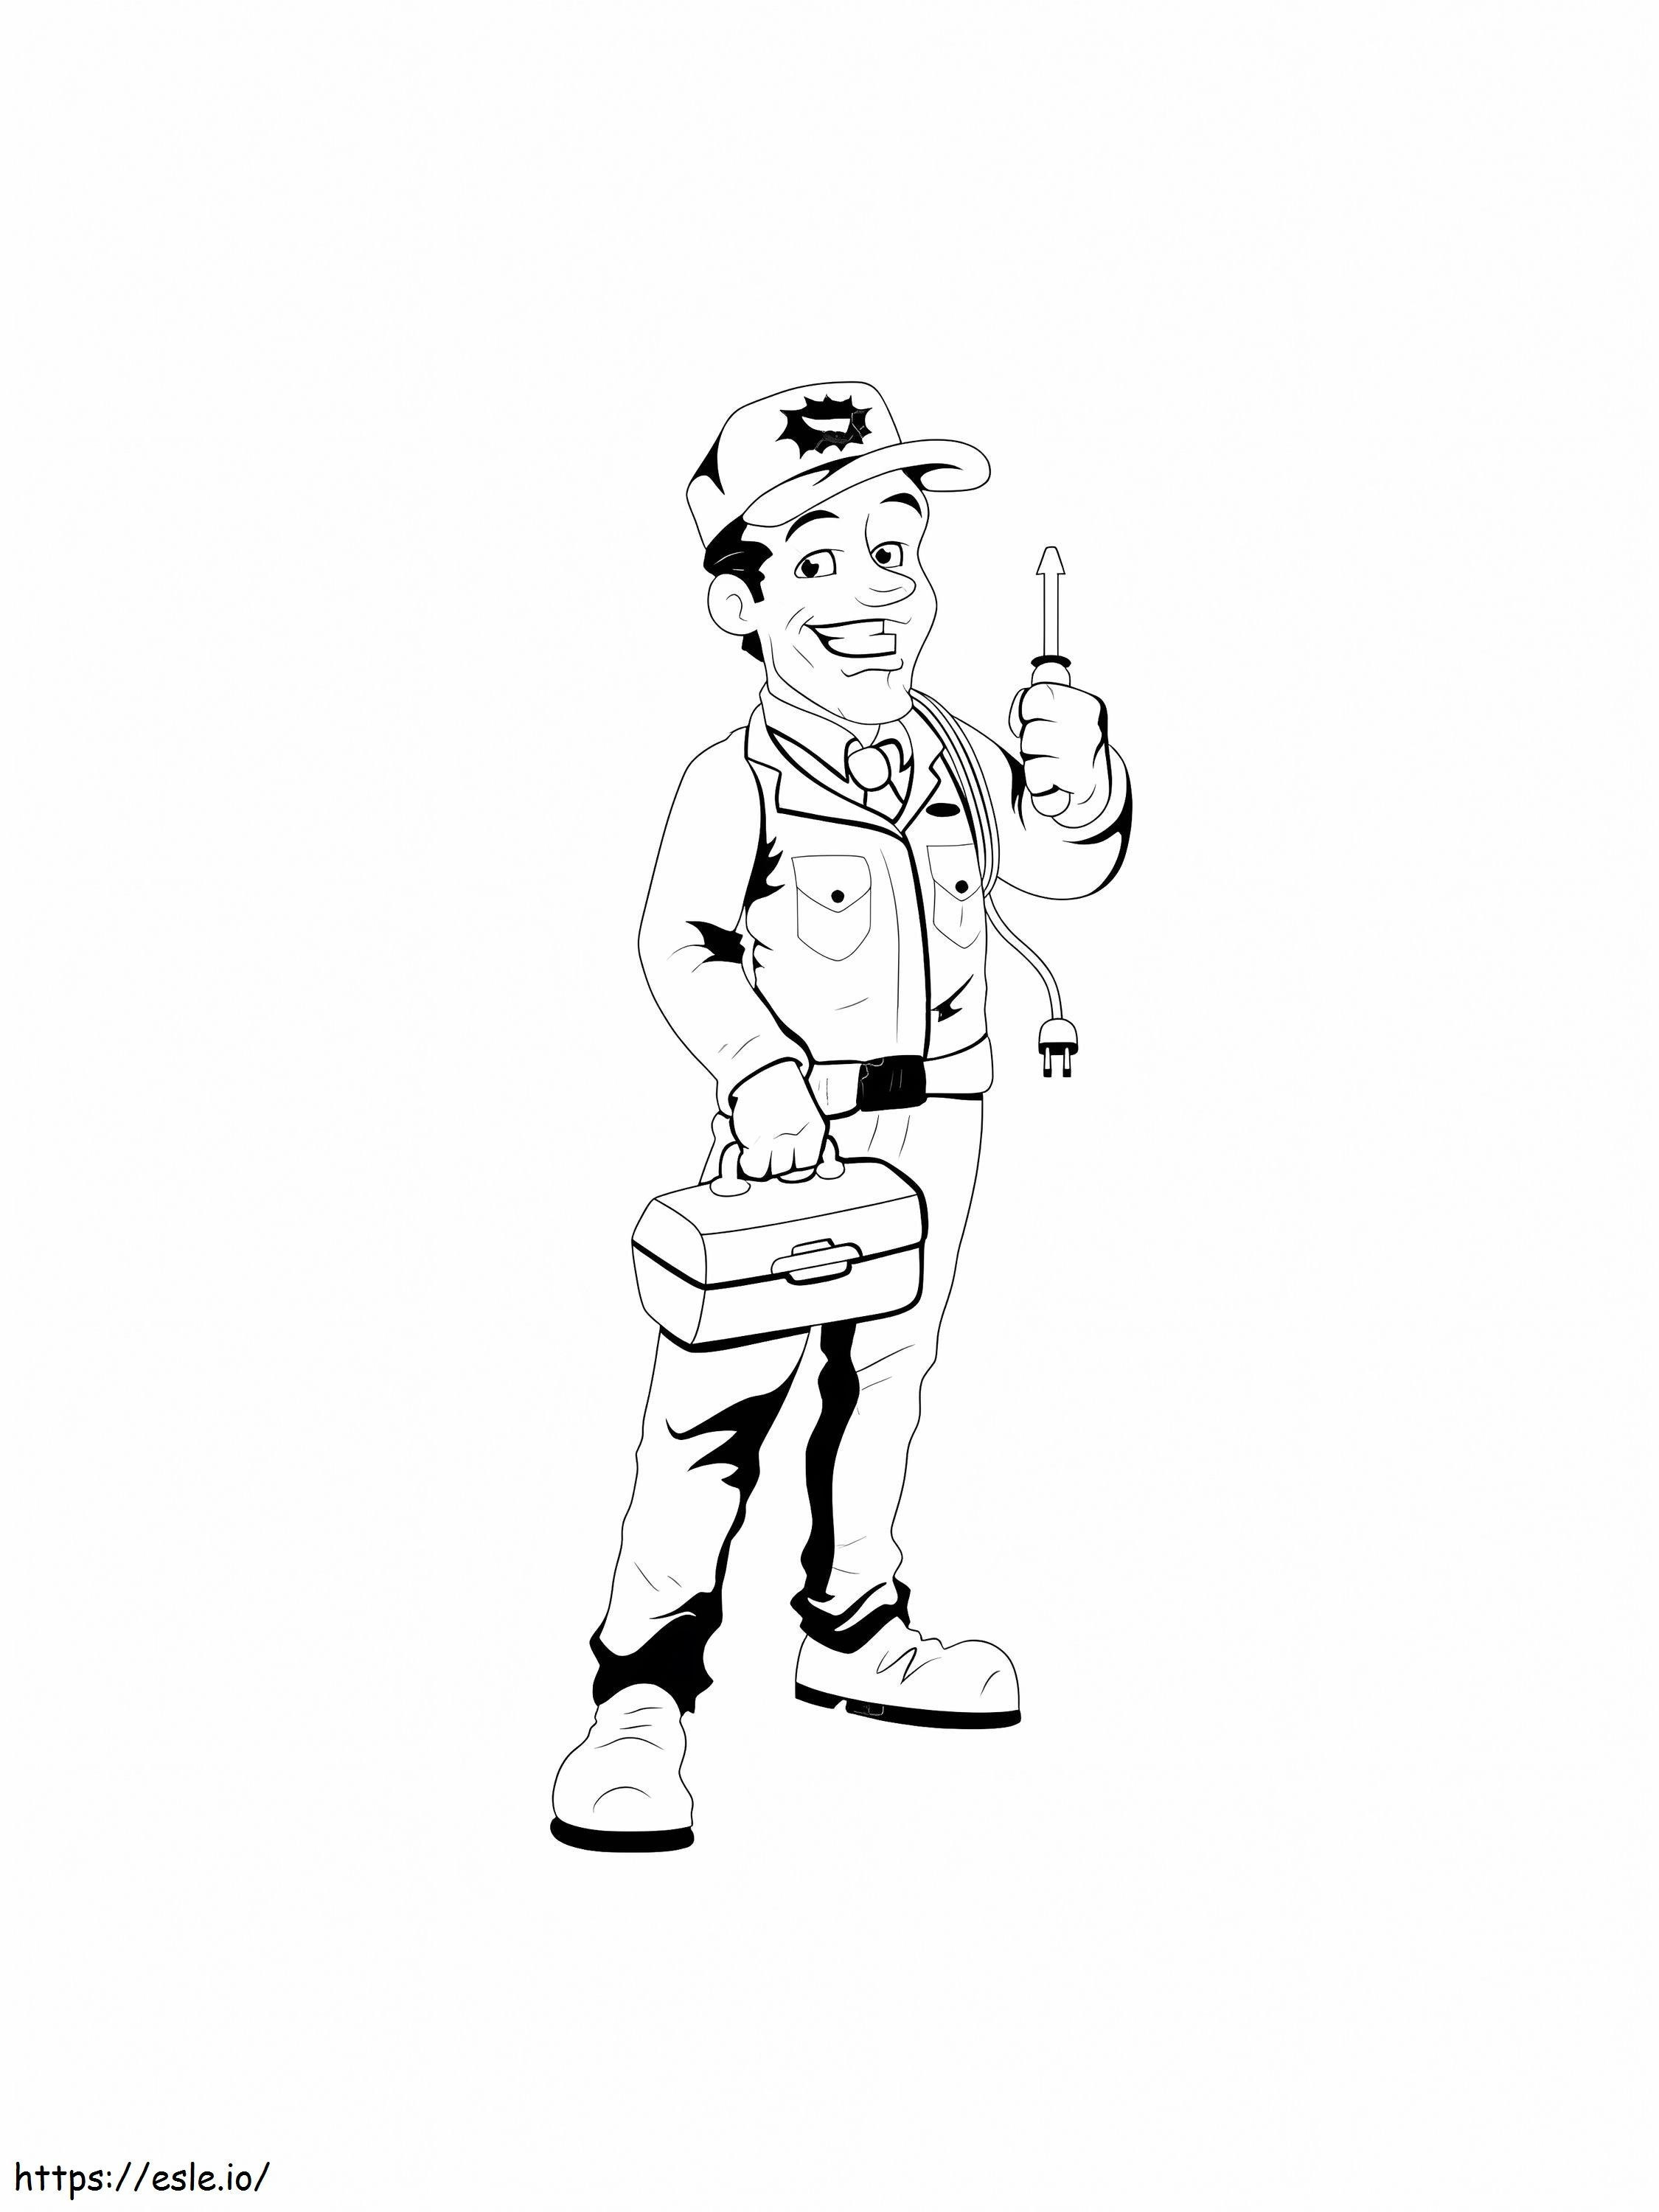 Electrician Is Smiling coloring page